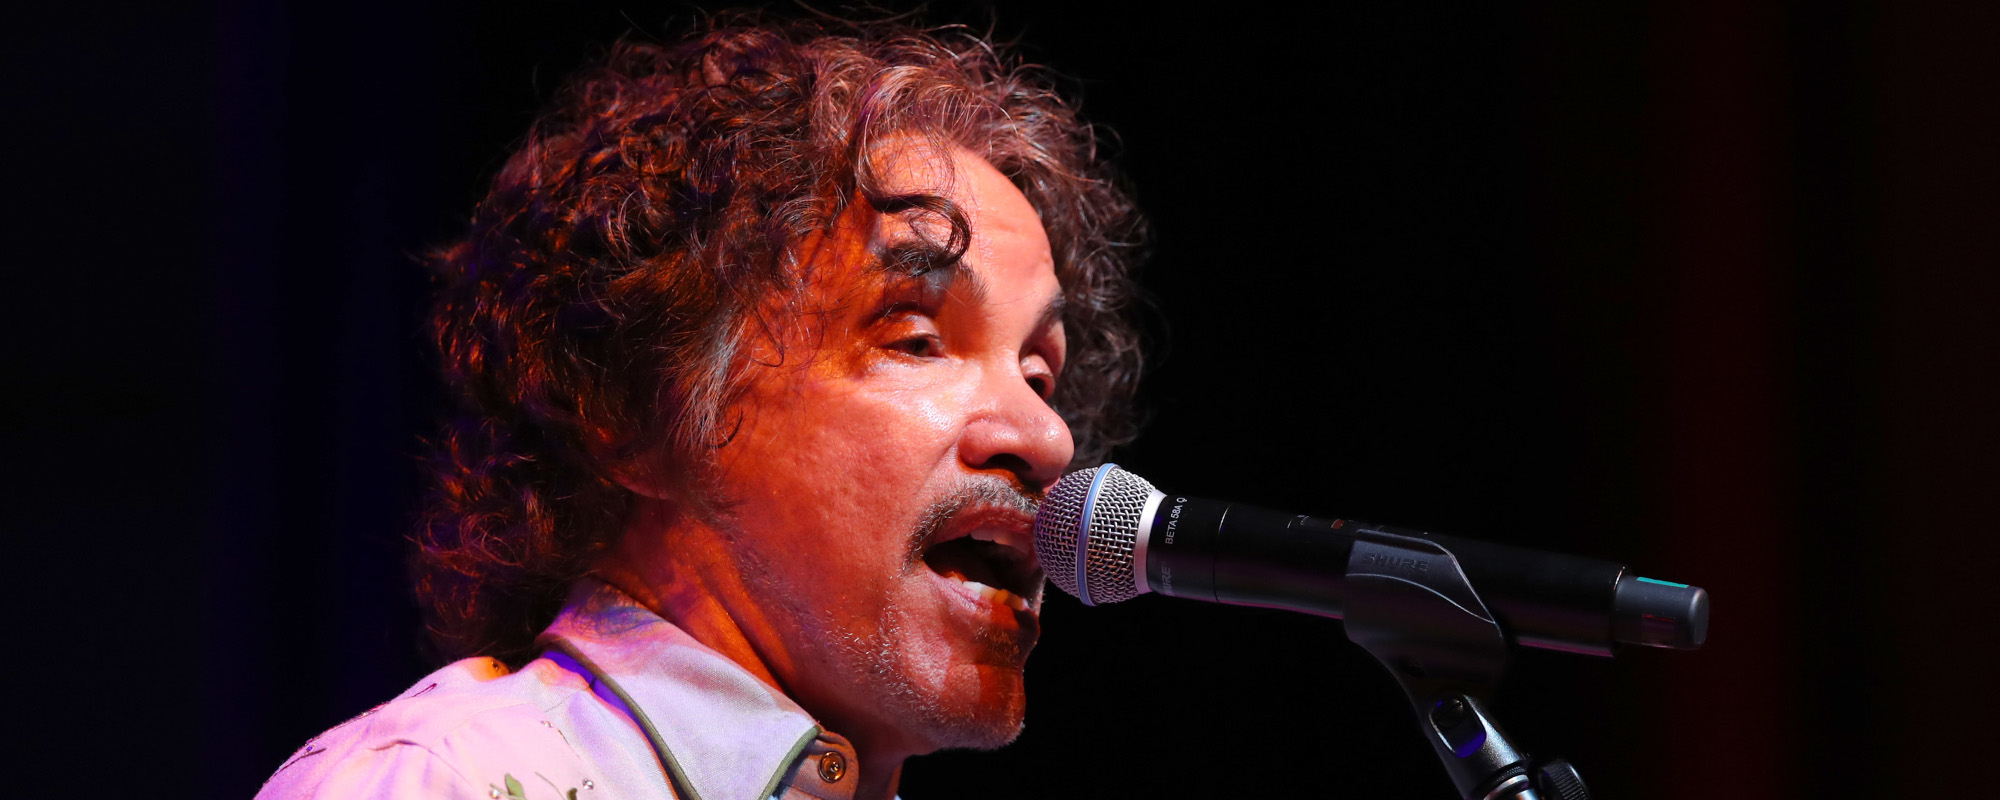 John Oates Shares First Social Media Post Since Daryl Hall Lawsuit